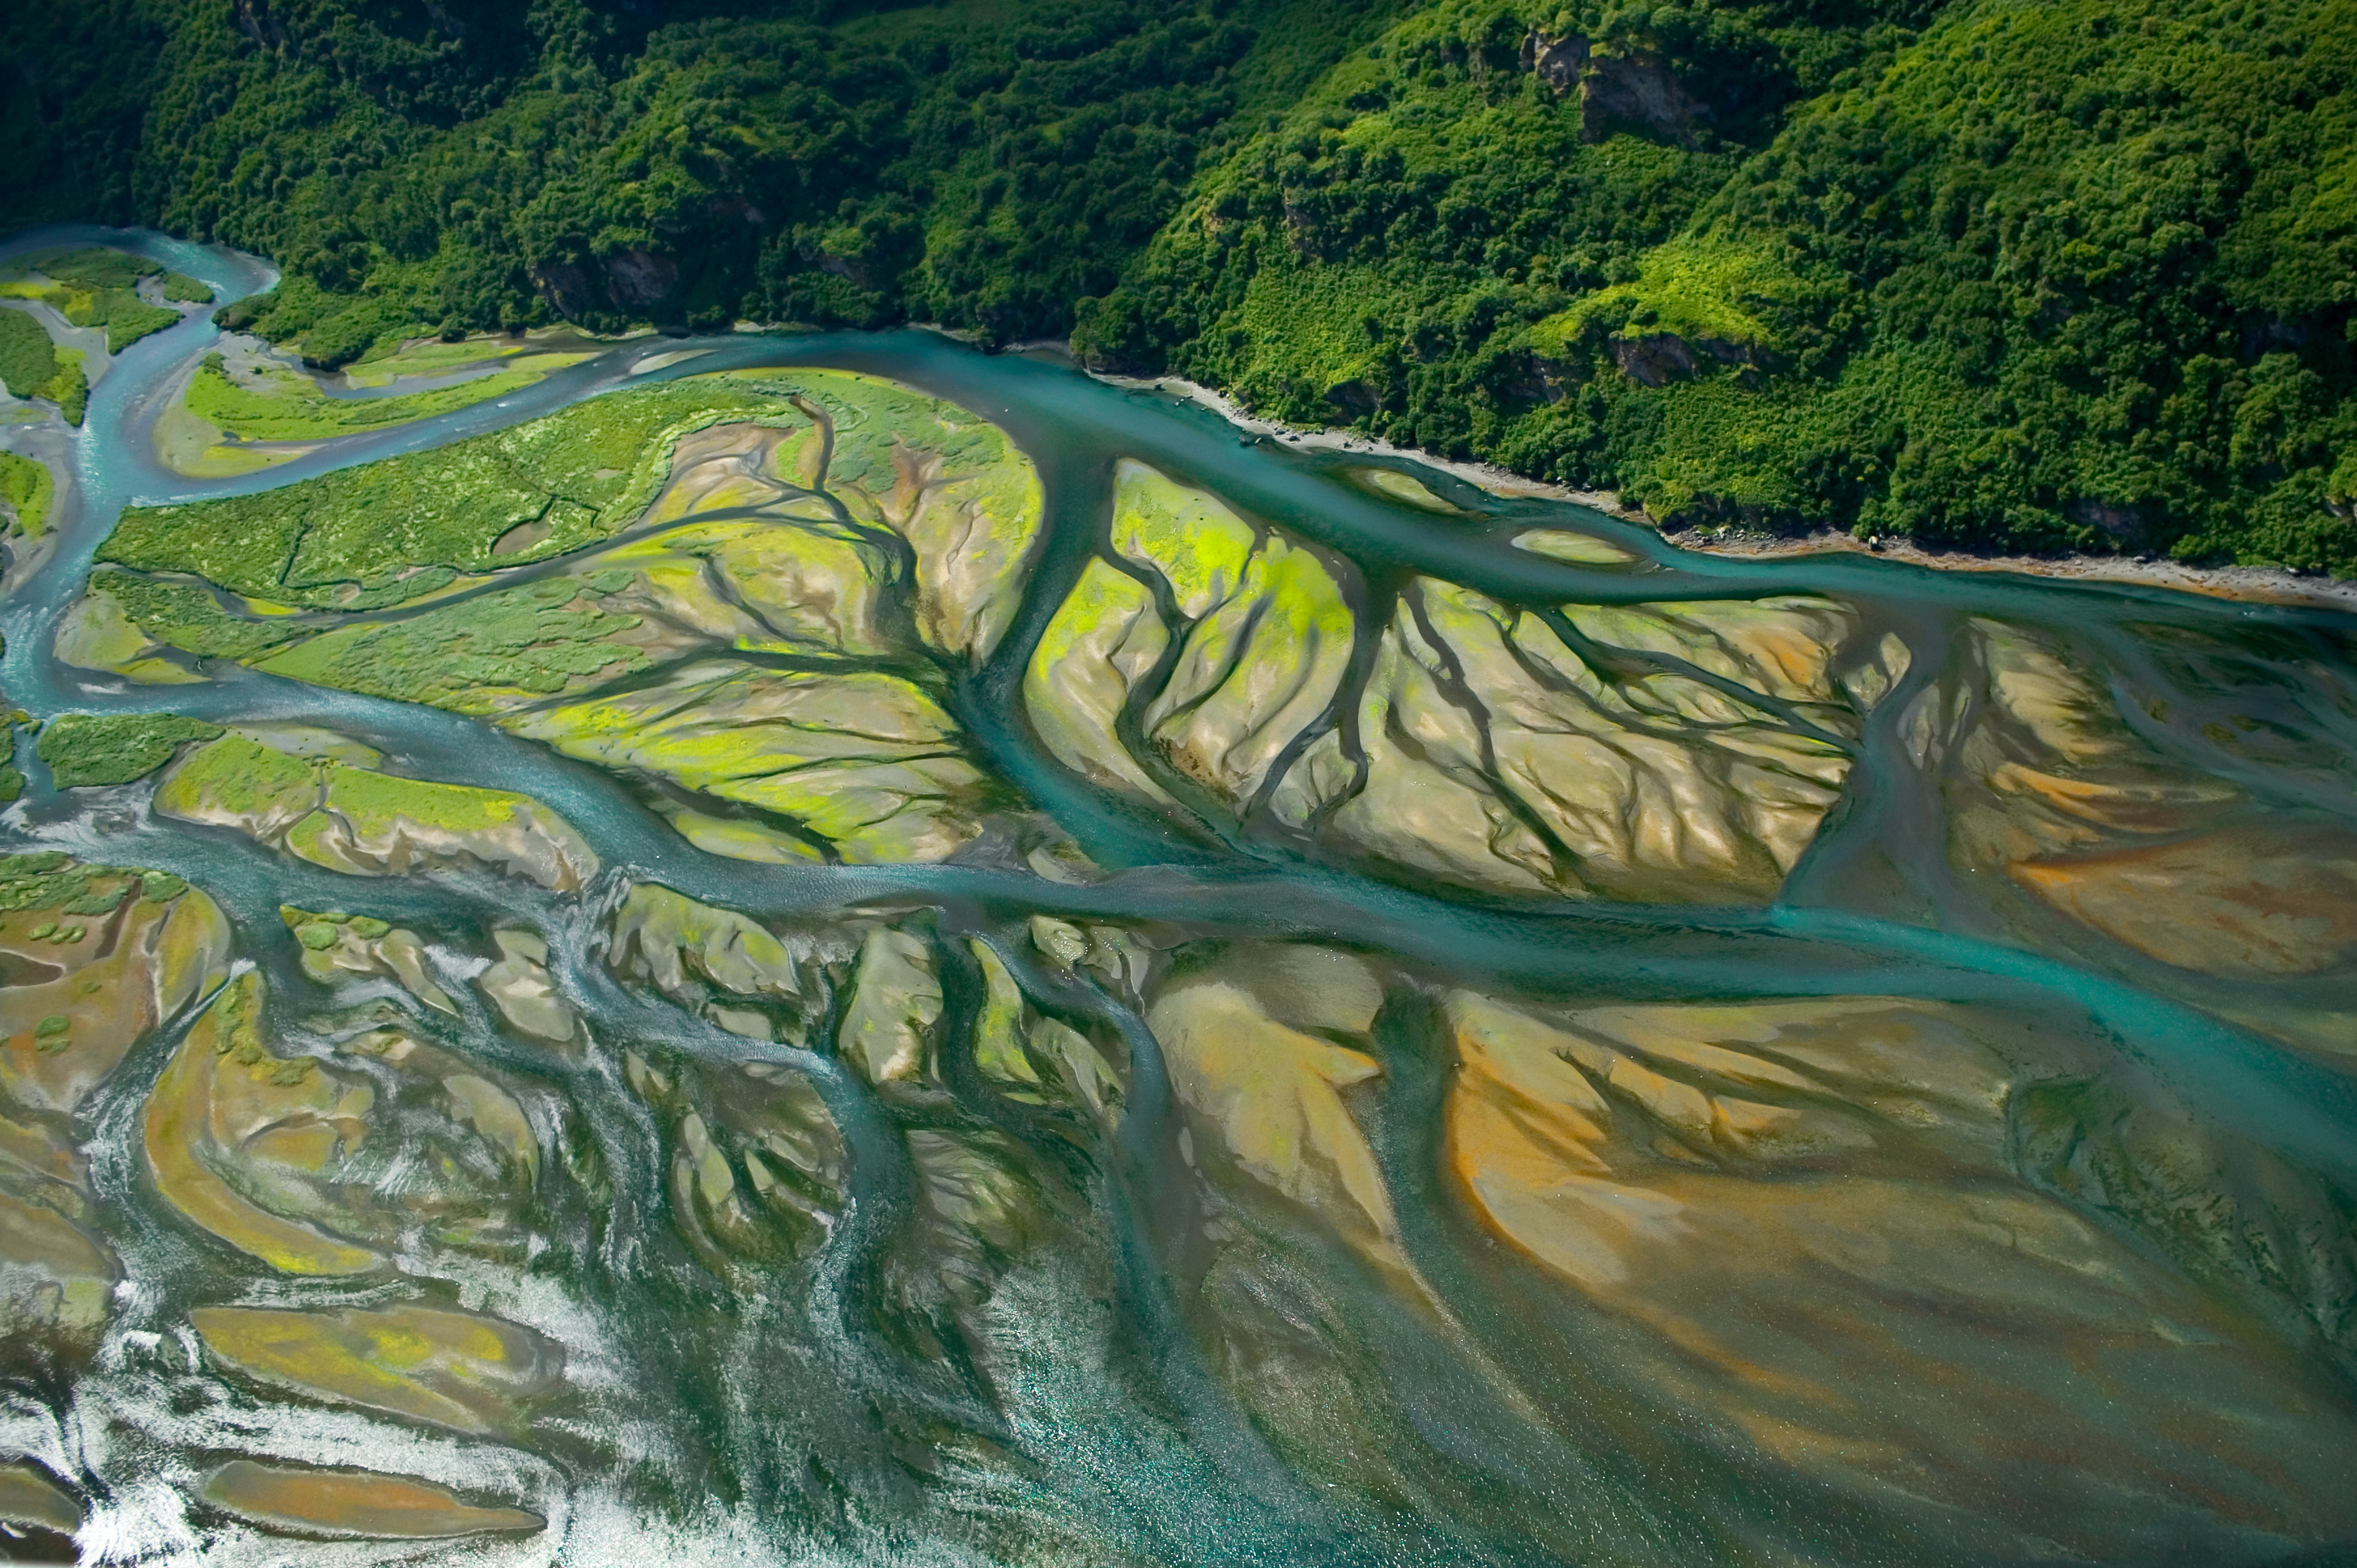 A glacial river branches out in a broad coastal delta and meets the North Pacific Ocean.